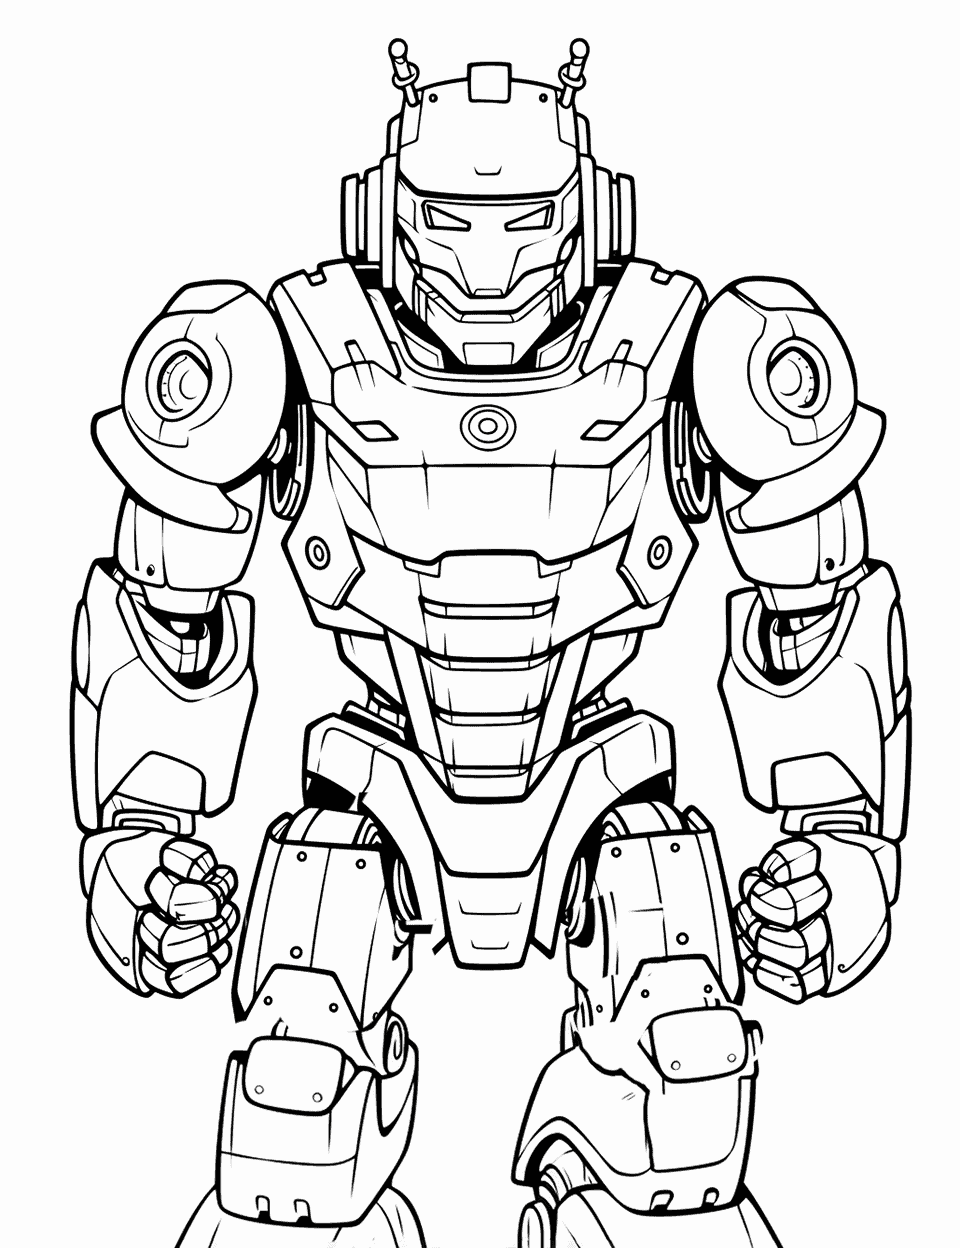 Advanced Mech Warrior Robot Coloring Page - An advanced adult-friendly robot suited up with armor ready for battle.